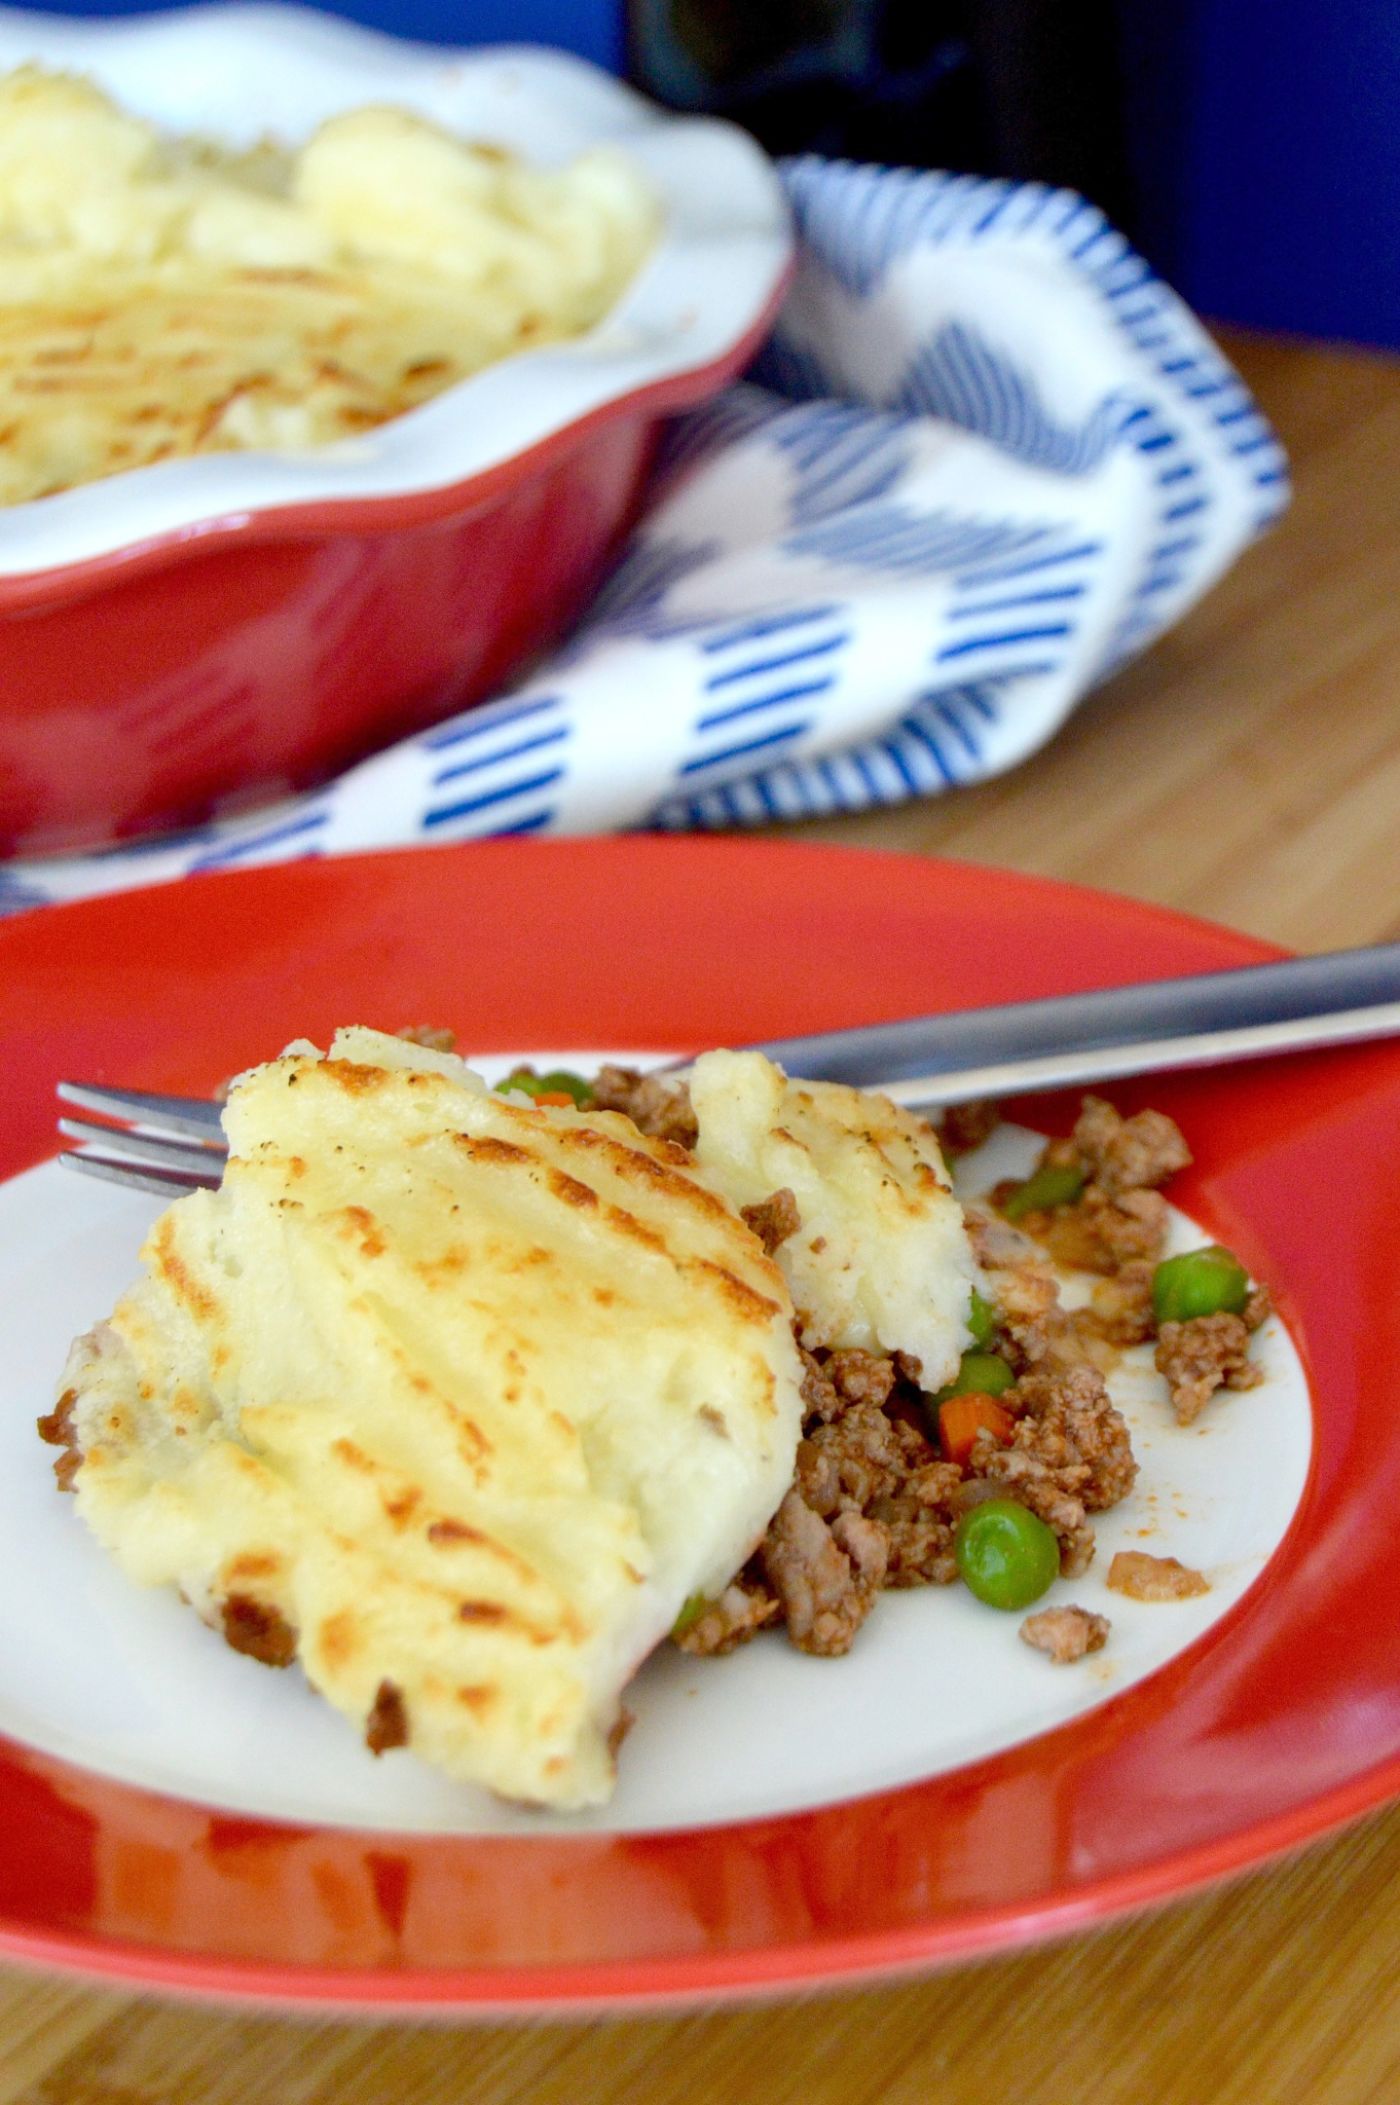 Cook once, eat twice. Gouda Cheesy Shepherds Pie is great to eat now and freeze some for later when you're too busy to cook. Cheesy potatoes, warm and flavorful beef in every bite this comfort food recipe will be a family favorite!